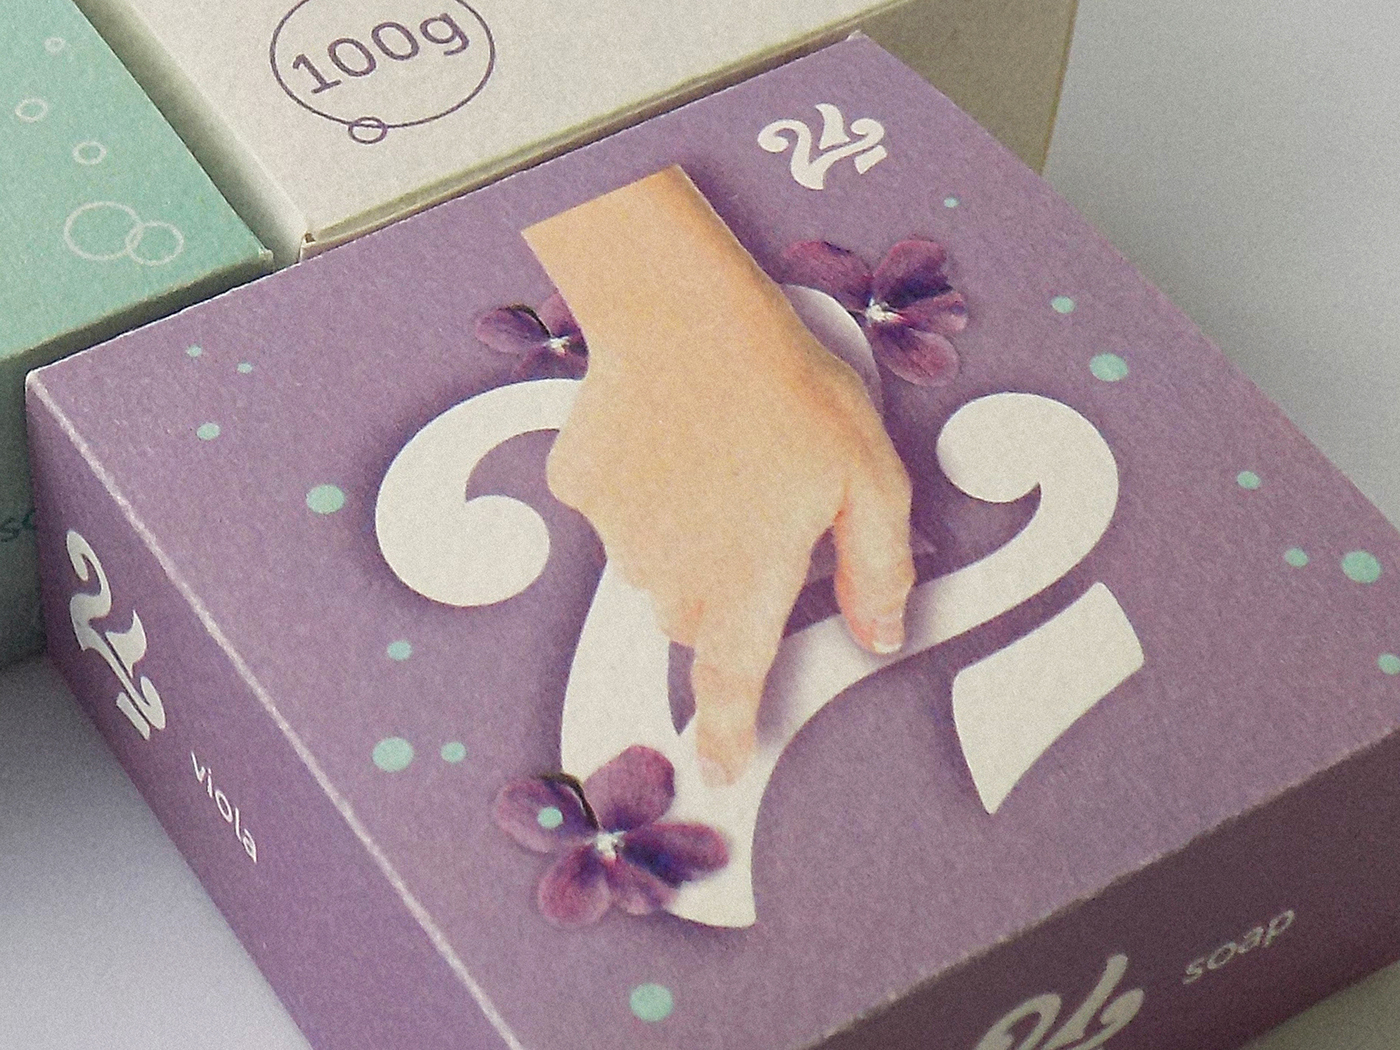 #graphic design #packaging #Print Design #soaps #cream soaps #French #lavender #Viola #violet #cream soap campaign #Advertising #Campaign #animation